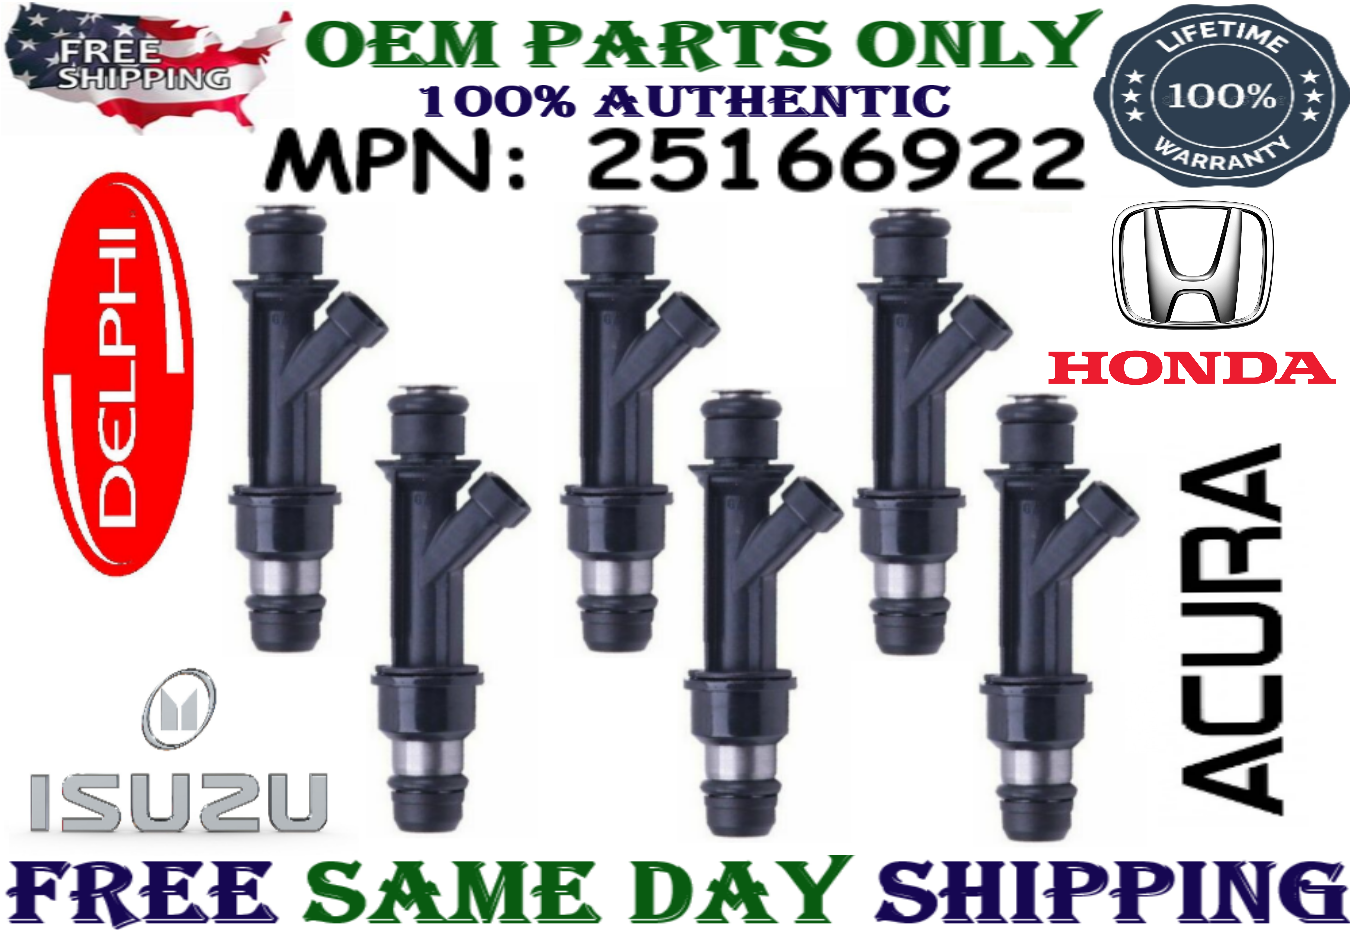 Primary image for OEM 6 PIECES Delphi Fuel Injectors 25166922 Fit for 2001 Isuzu VehiCross 3.5L V6